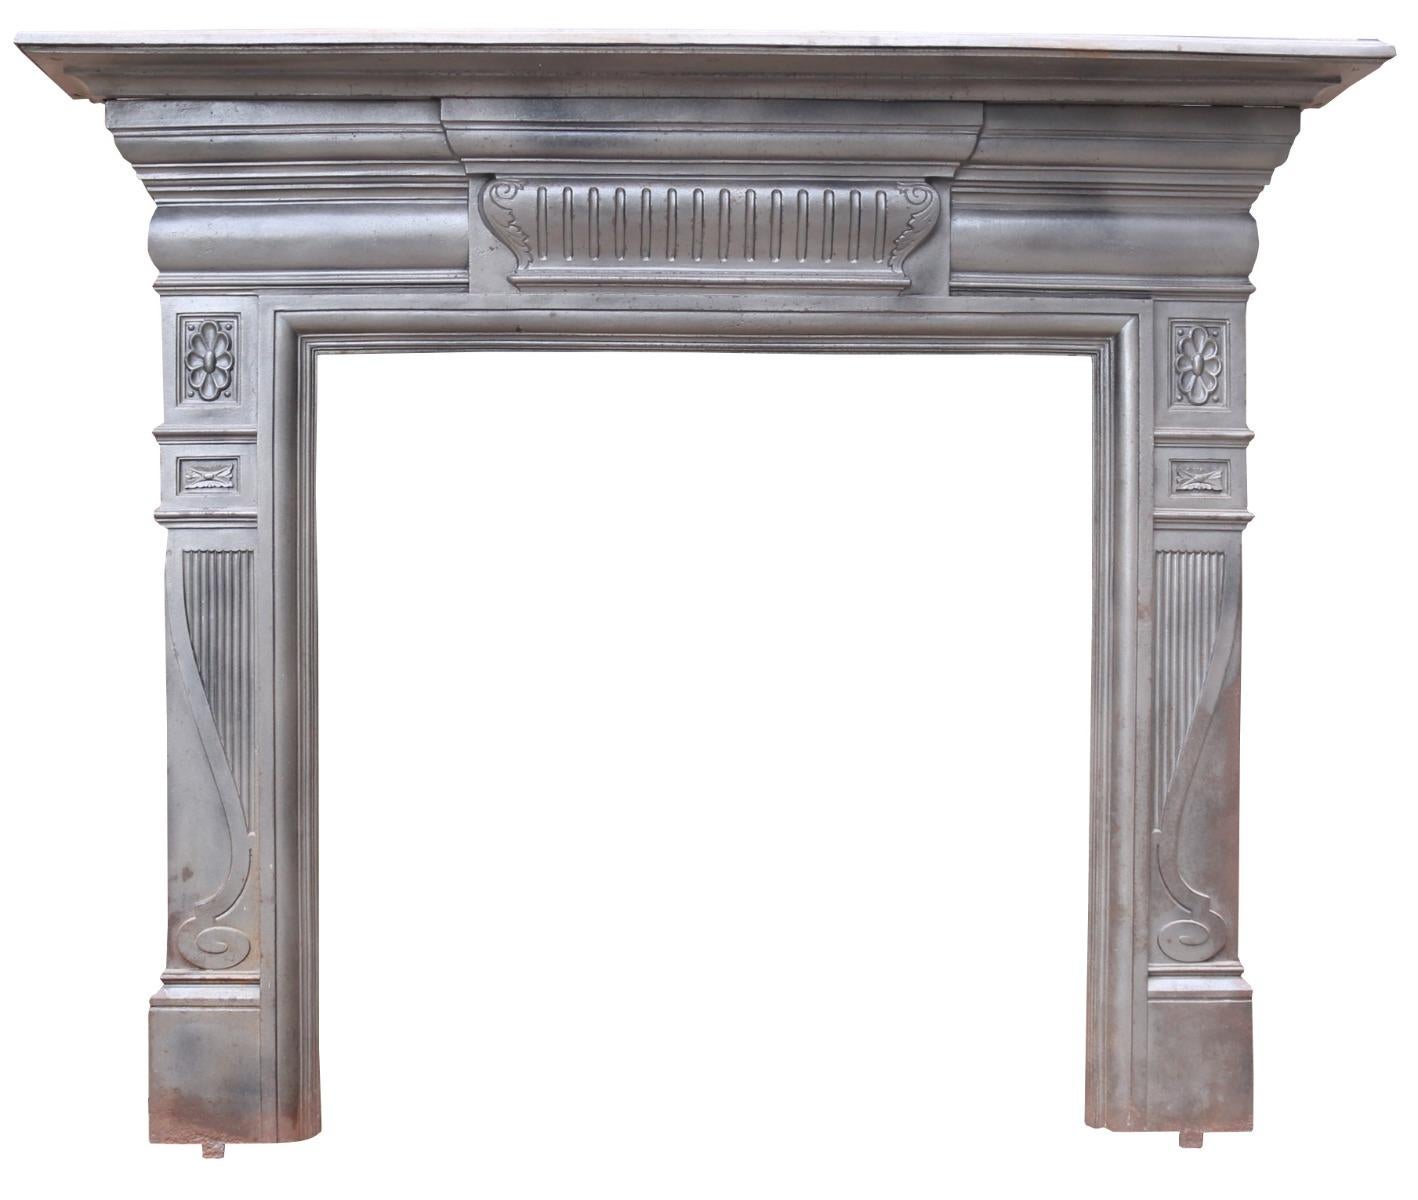 This Victorian mantel was salvaged from a house in West London. Additional Dimensions: Opening height 95.5 cm Opening width 95 cm Width between outside of legs 135 cm.